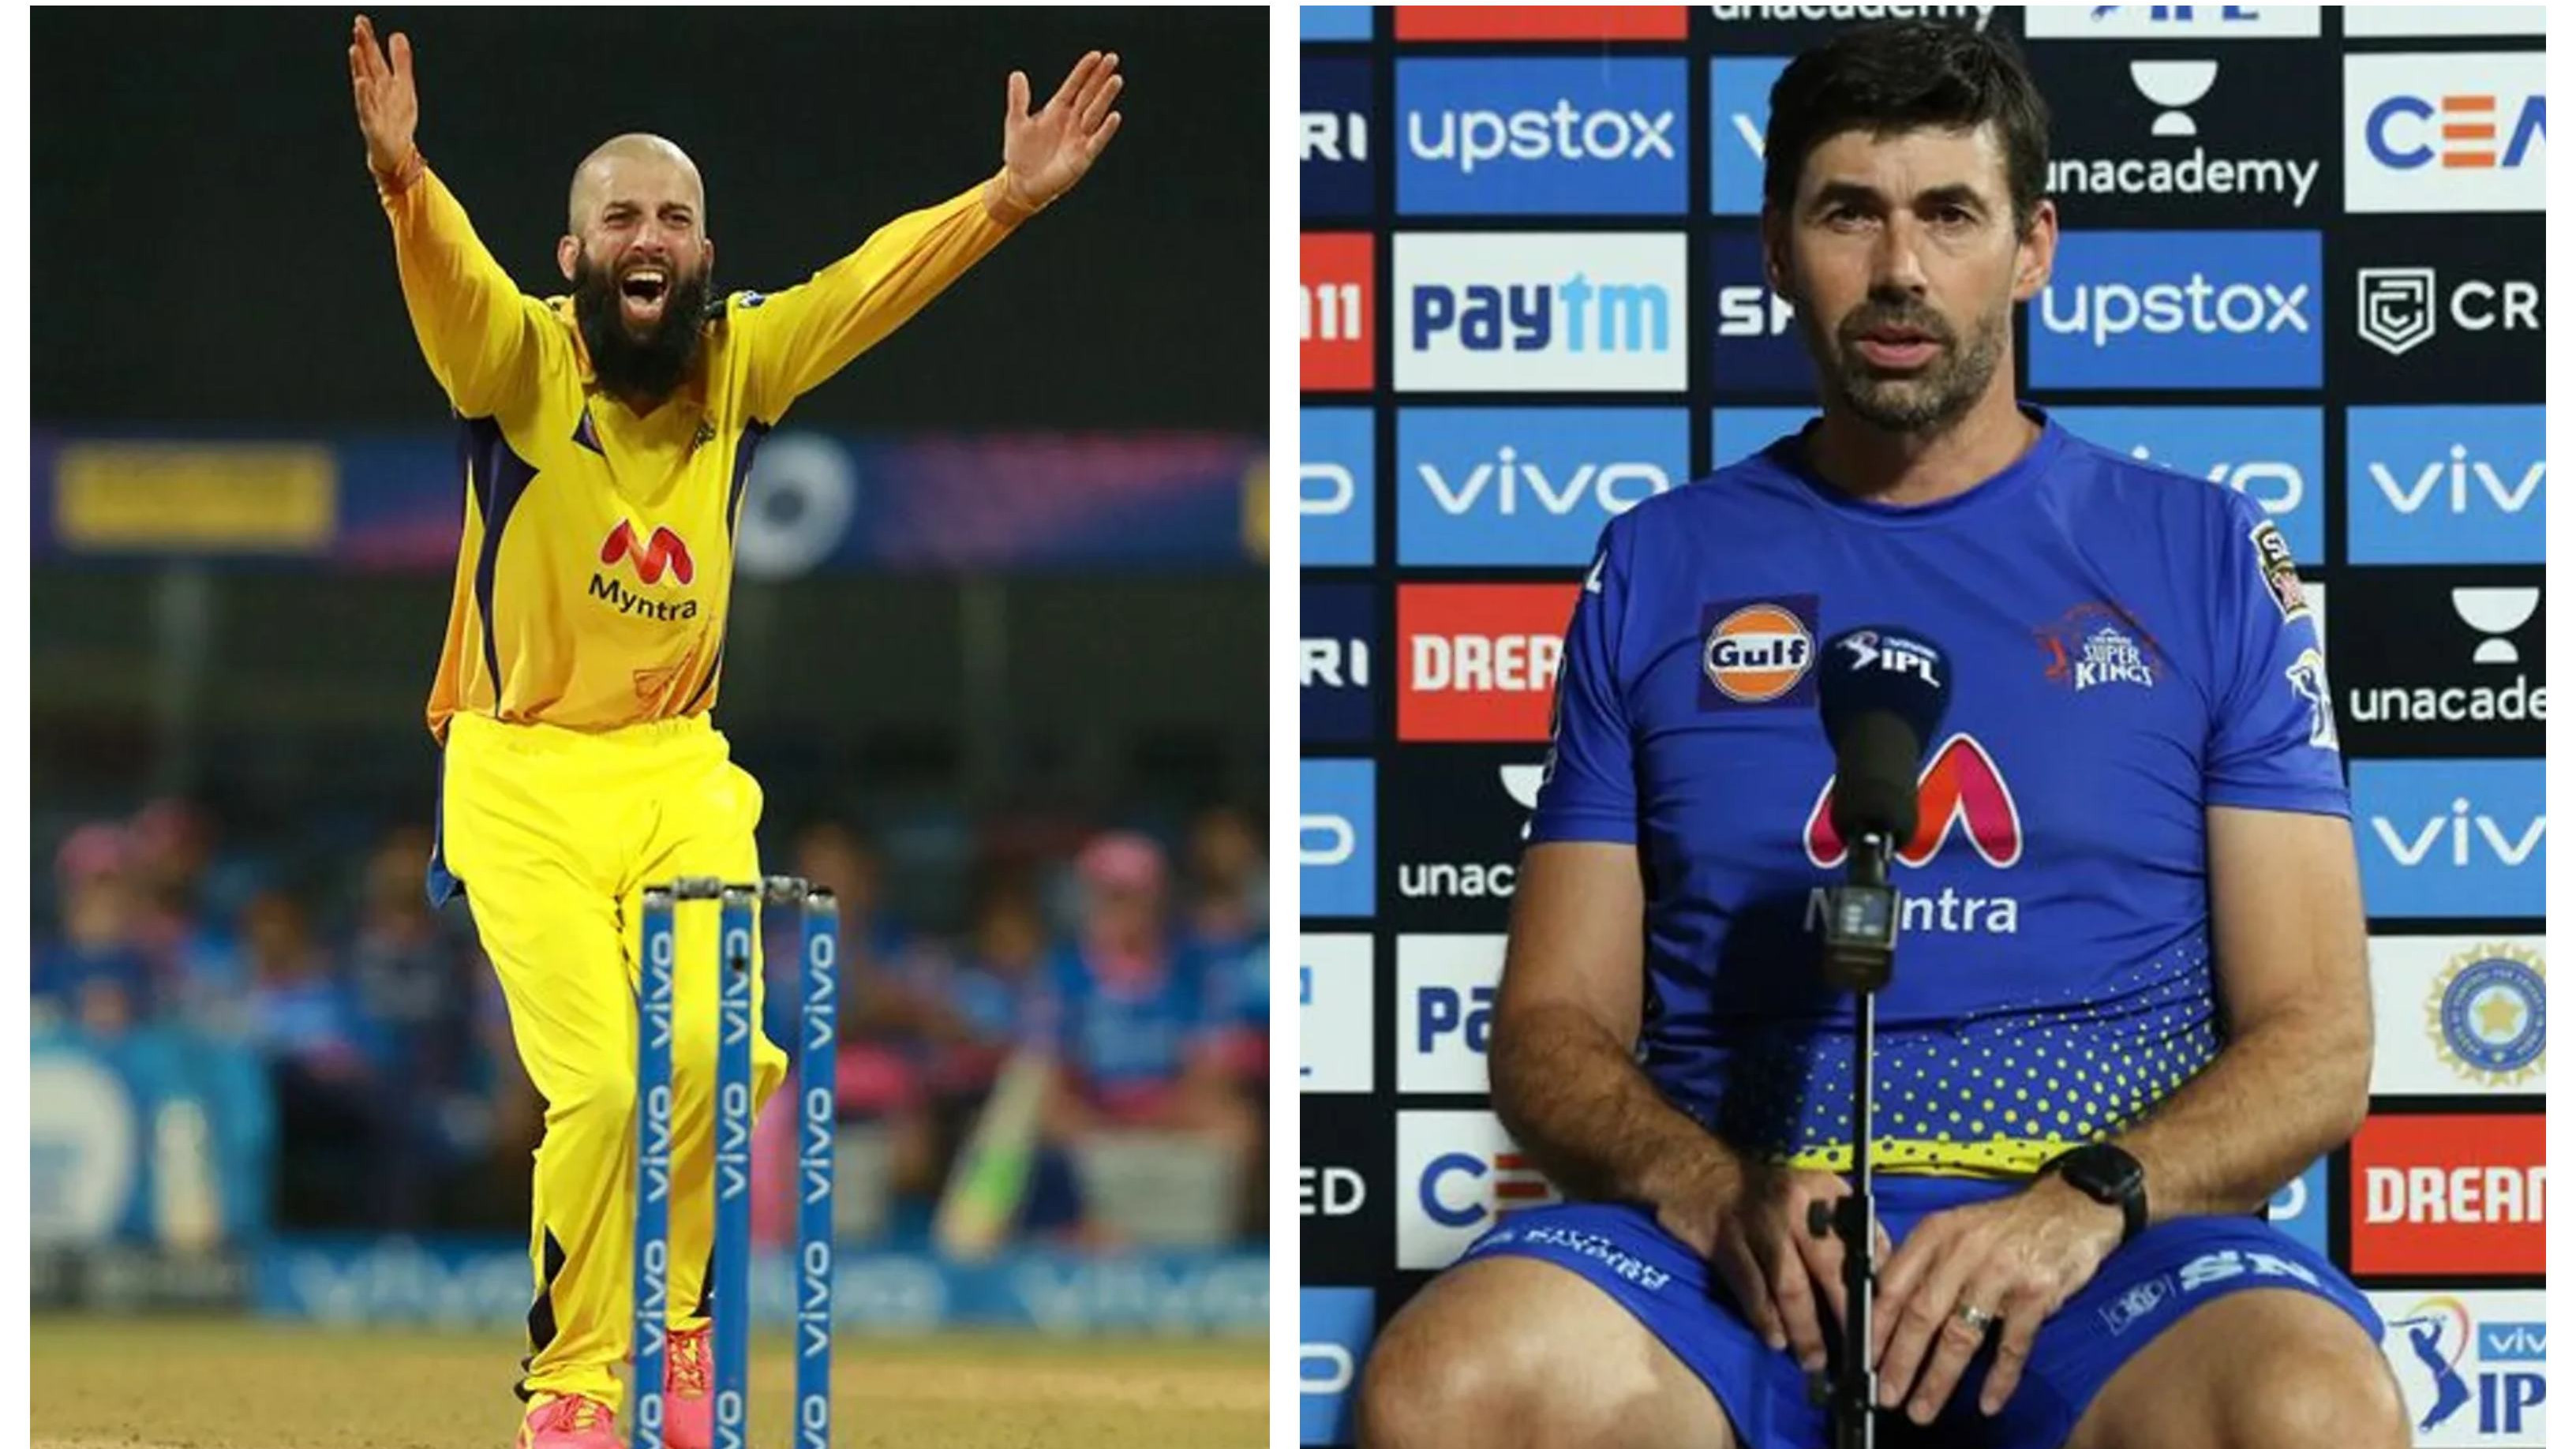 IPL 2021: Stephen Fleming praises Moeen Ali for bolstering CSK with his all-round attributes